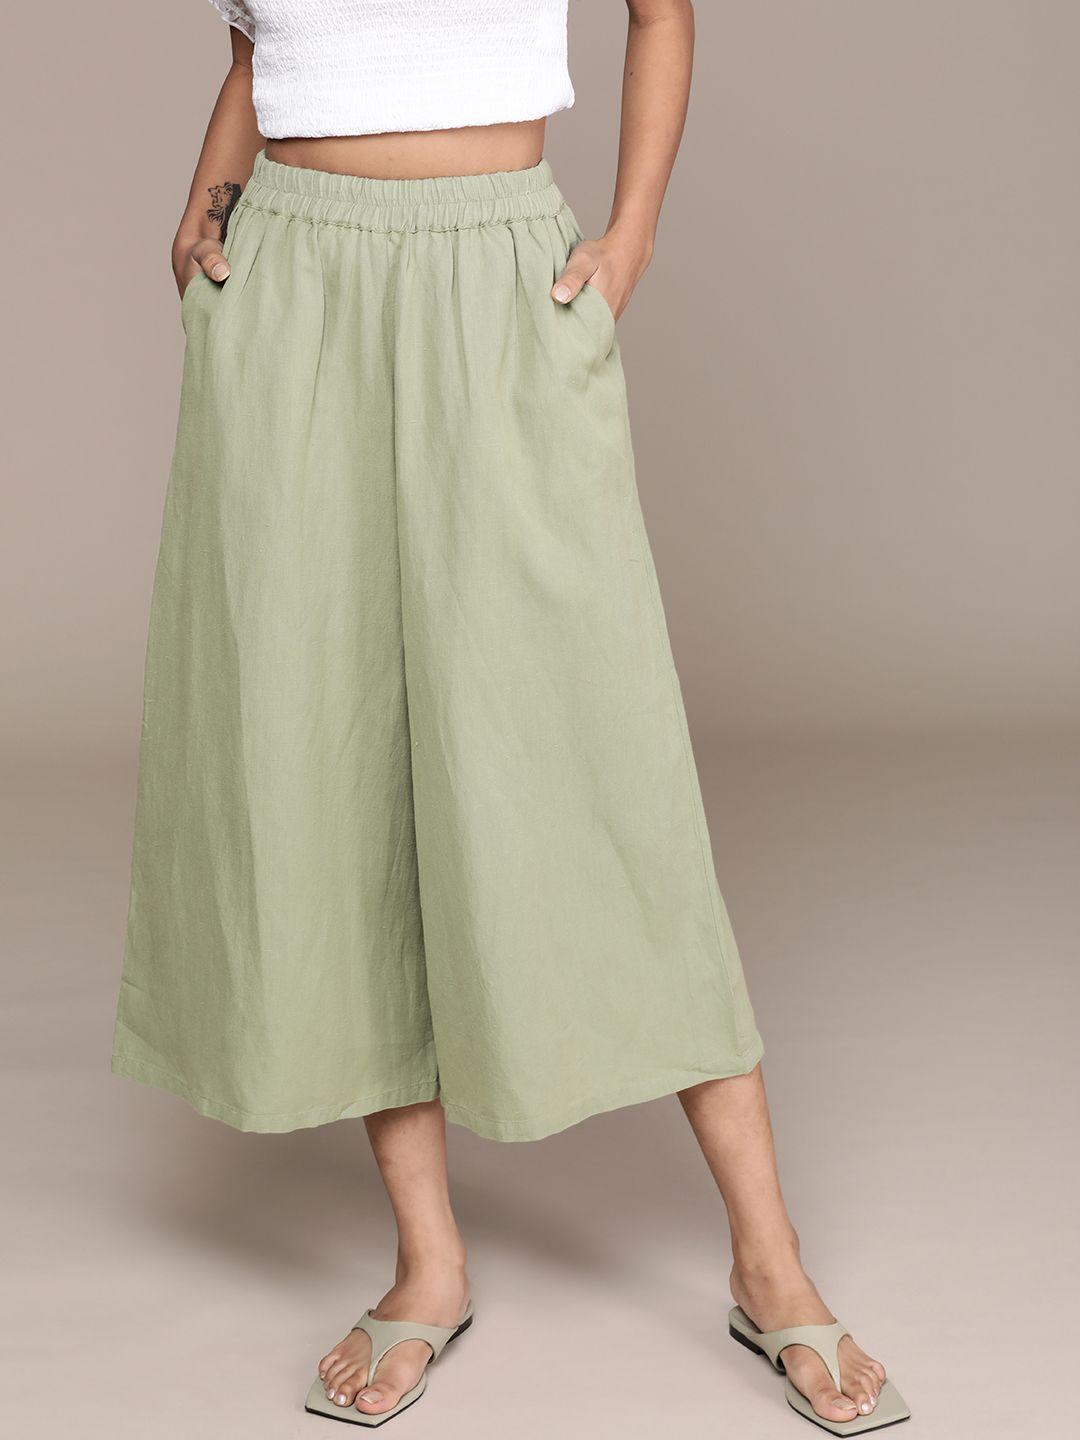 label ritu kumar women green pure cotton solid loose fit pleated culottes trousers